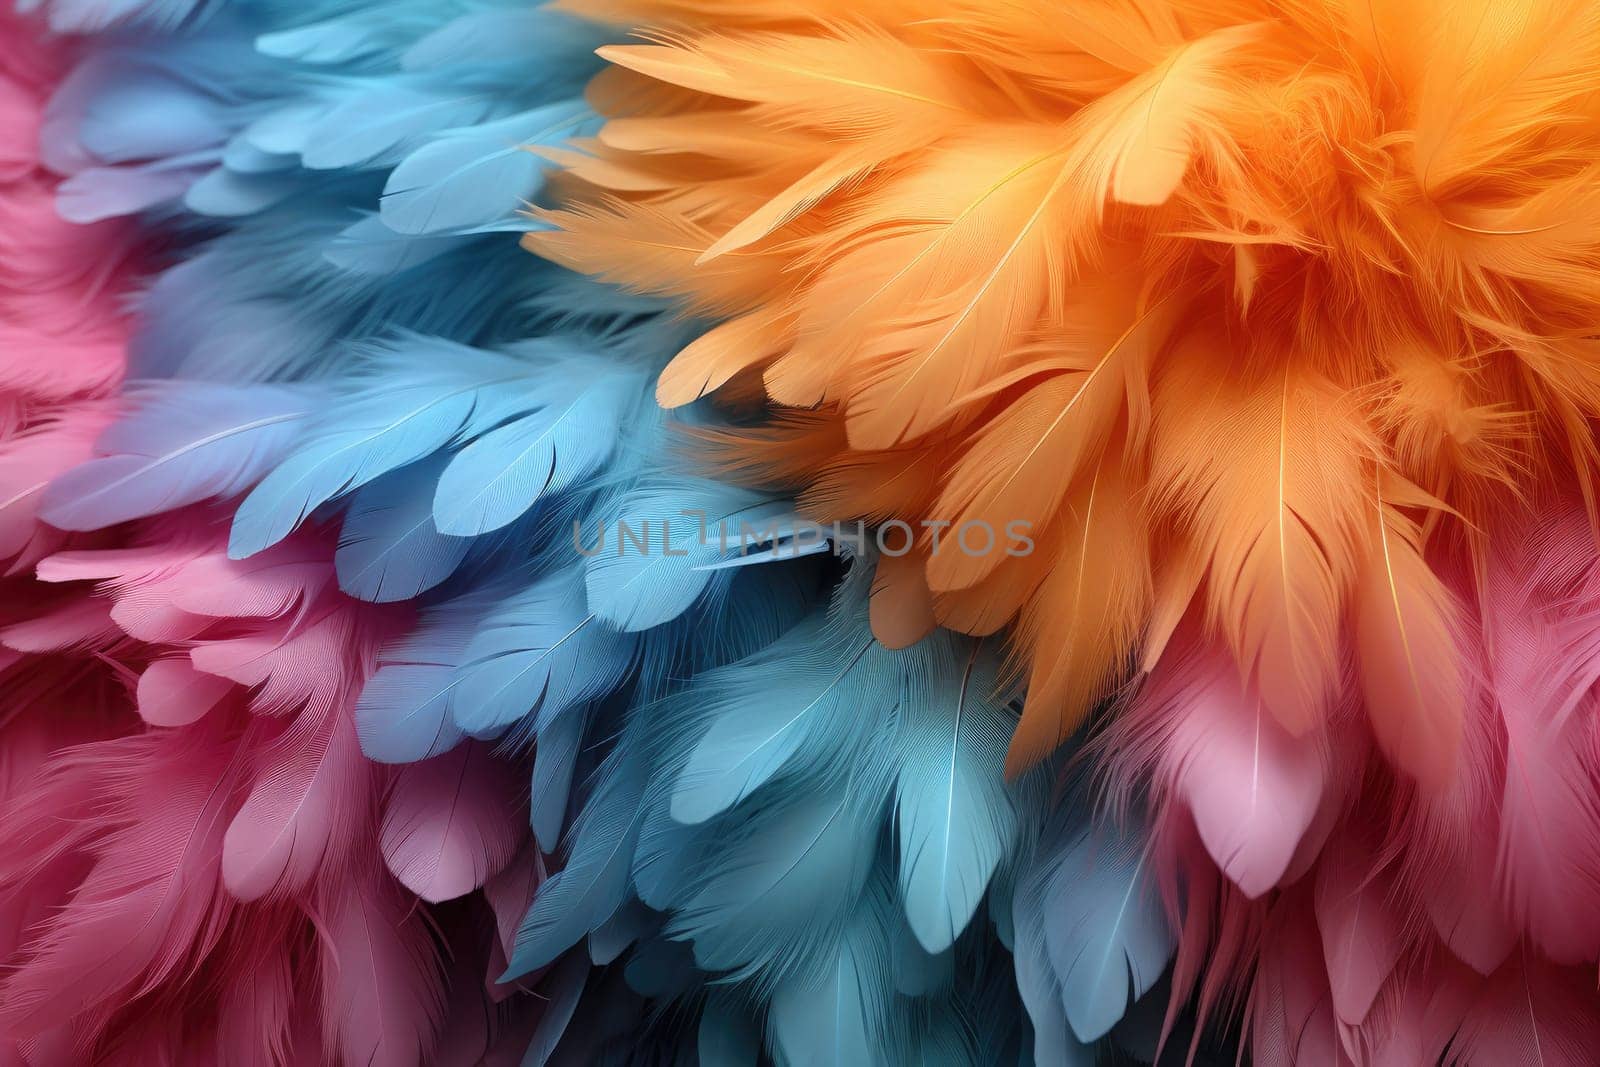 Multicolor Large Bird Feathers: Abstract Texture by Yurich32